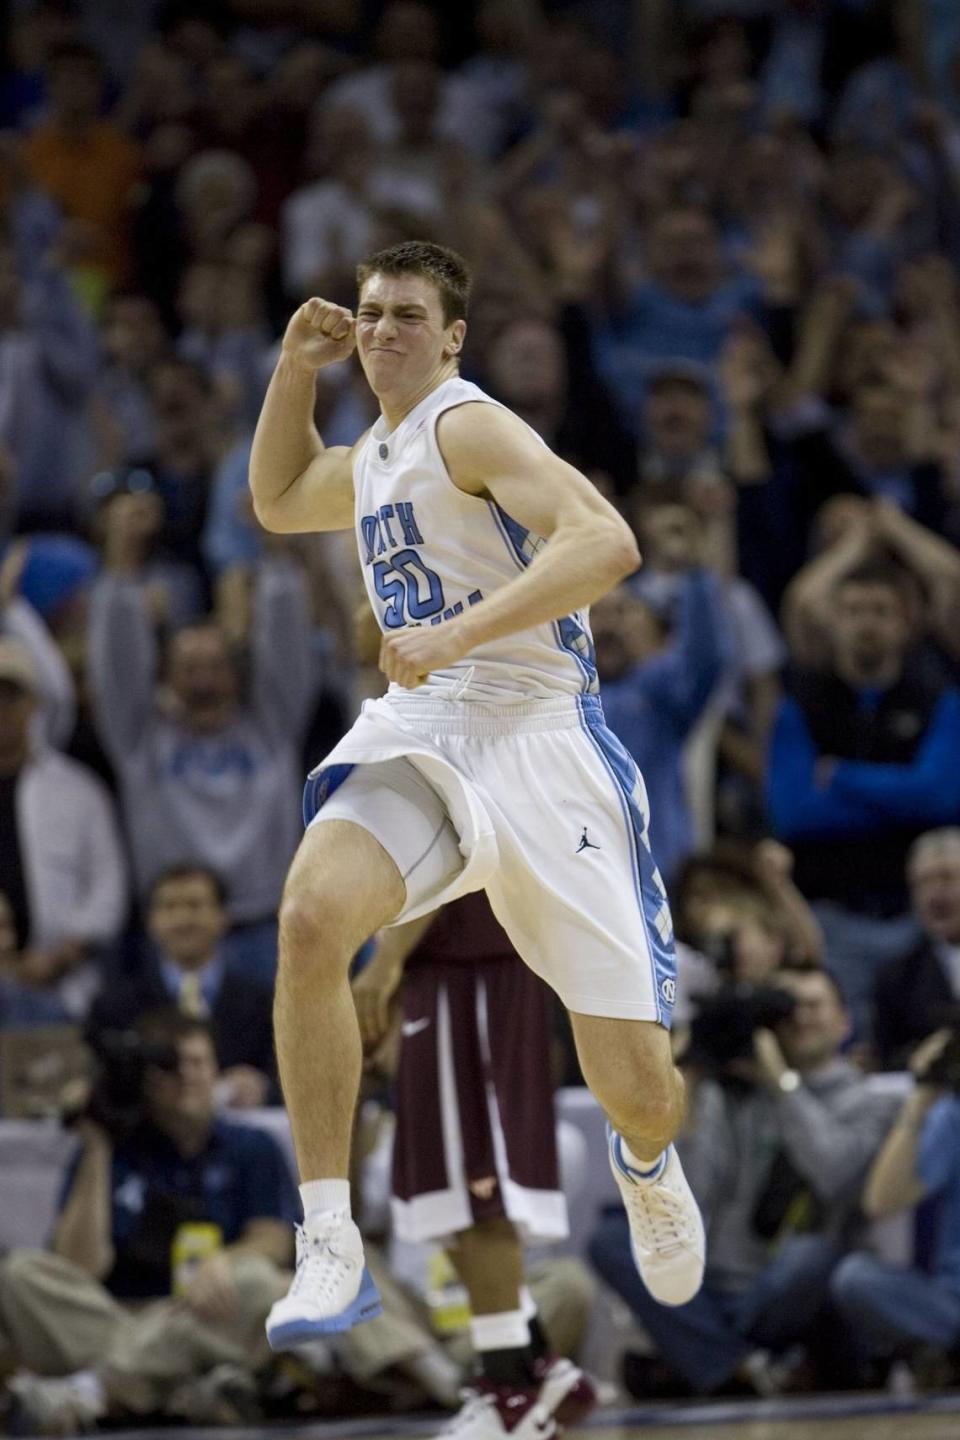 UNC4.SP.031508.RTW--Charlotte, N.C.--UNC Tyler Hansbrough (50) celebrates his game winning shot to give UNC a 68-66 victory over Virginia Tech on Saturday March 15, 2008 in the in the semifinals of the ACC Tournament in Charlotte Bobcats Arena. Staff photo by Robert Willett/The News & Observer